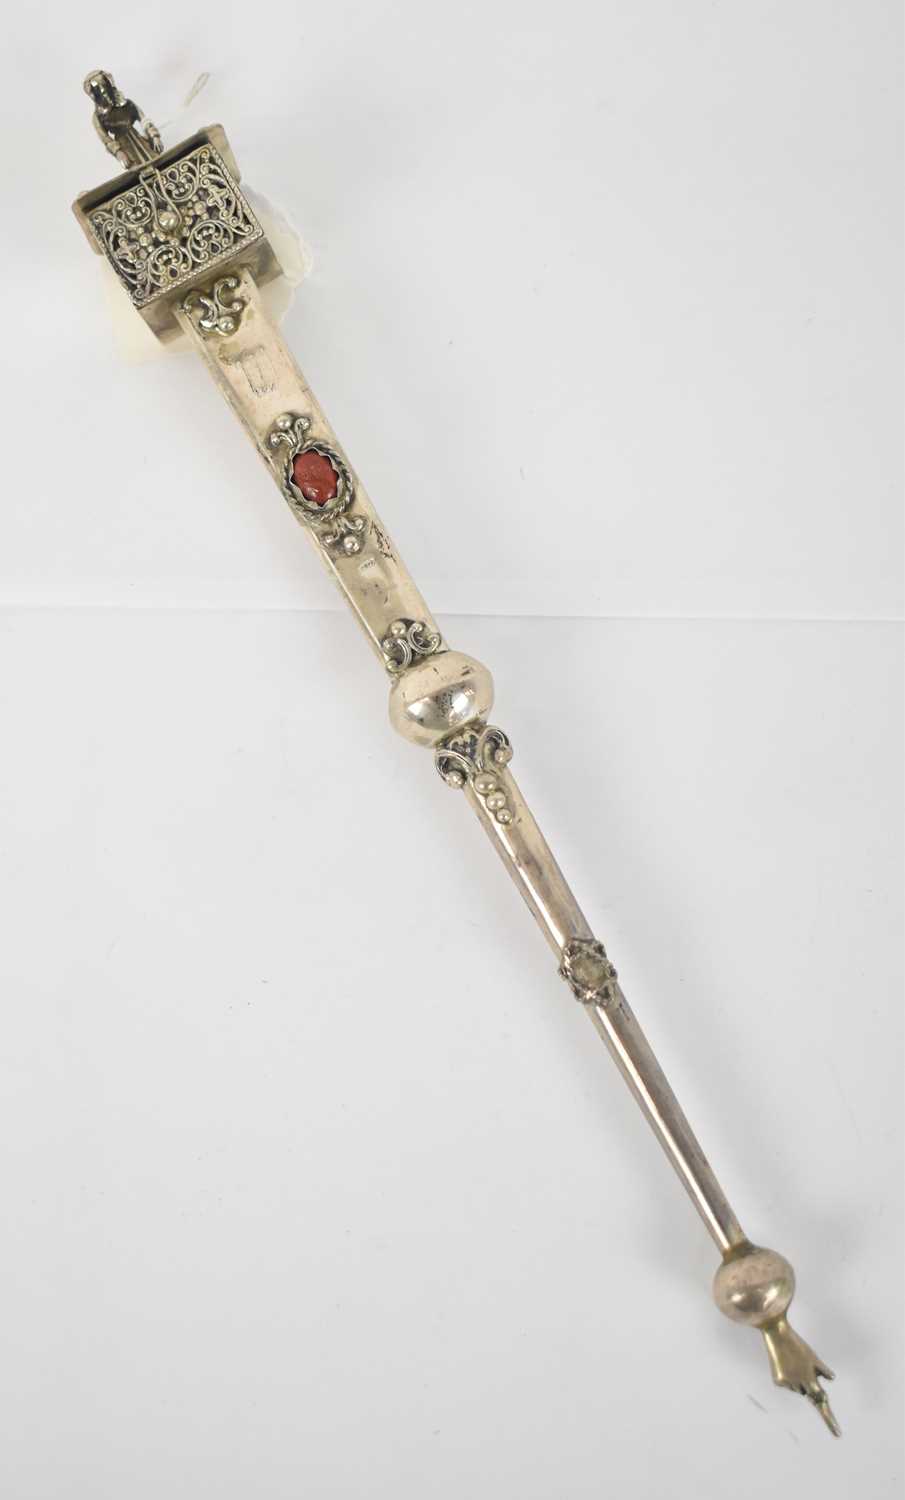 JUDAICA; a late 19th century Russian/Polish silver yad or Torah pointer, the top with hinged spice